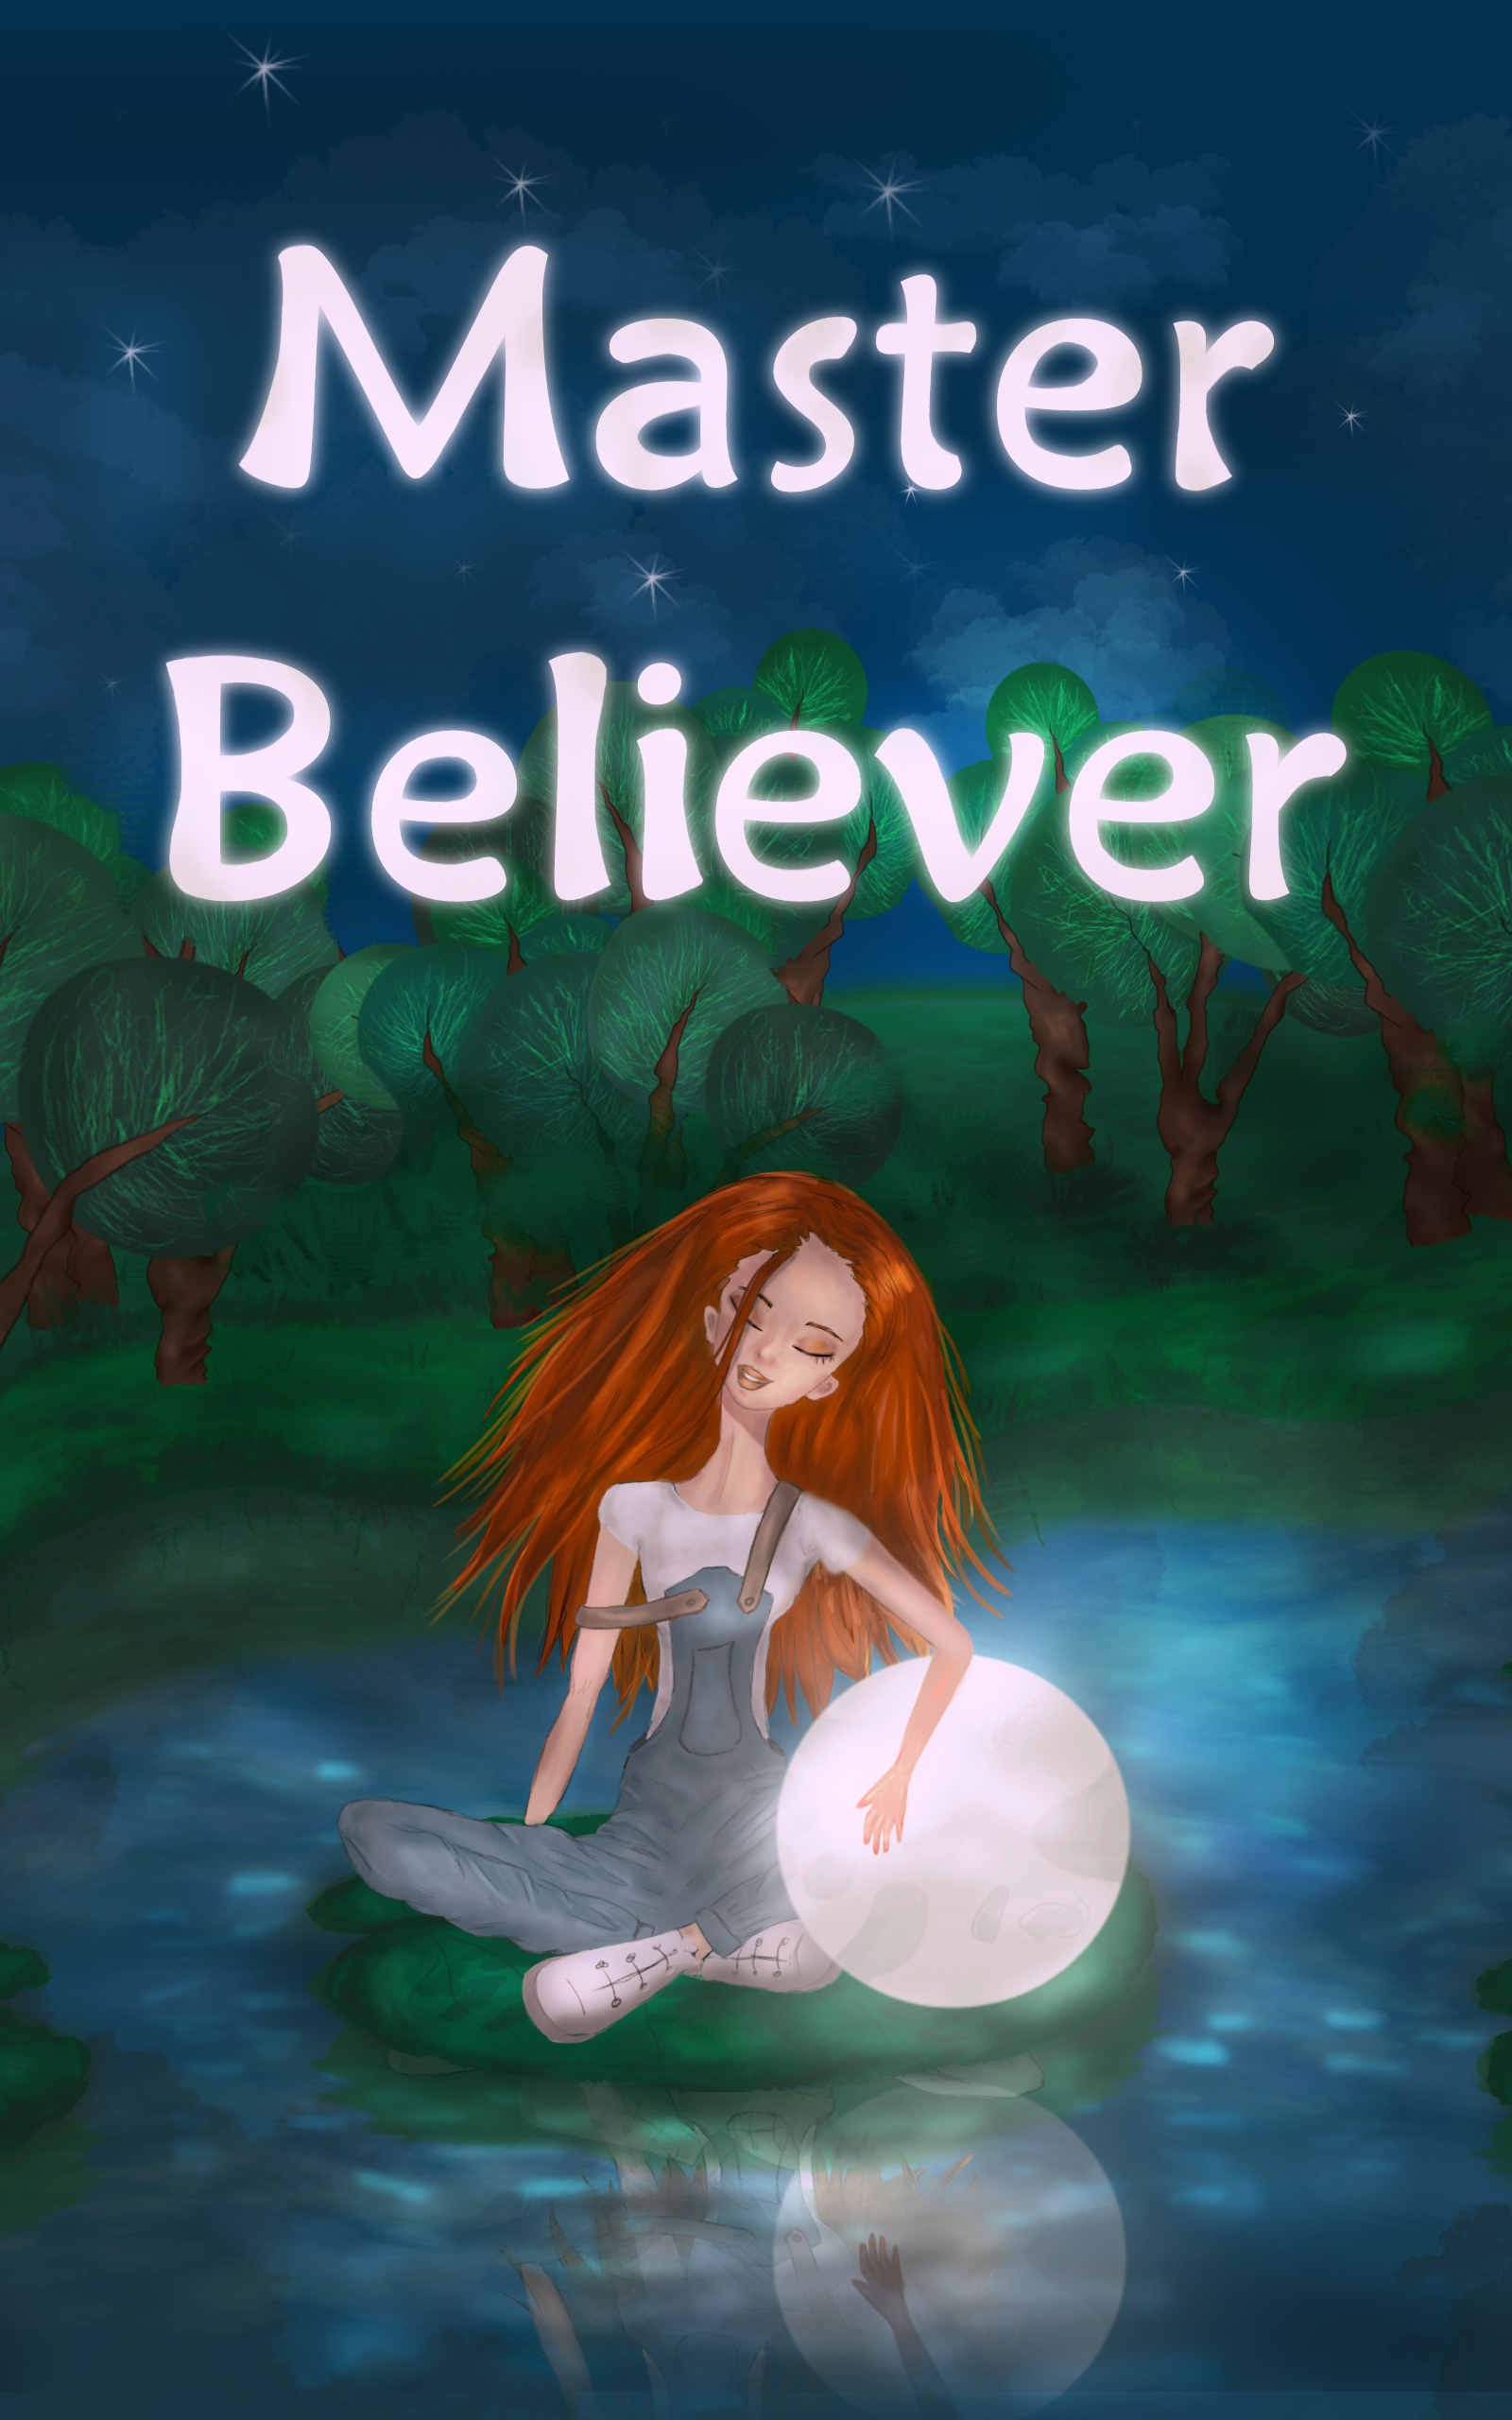 FREE: Master Believer by Luna MH